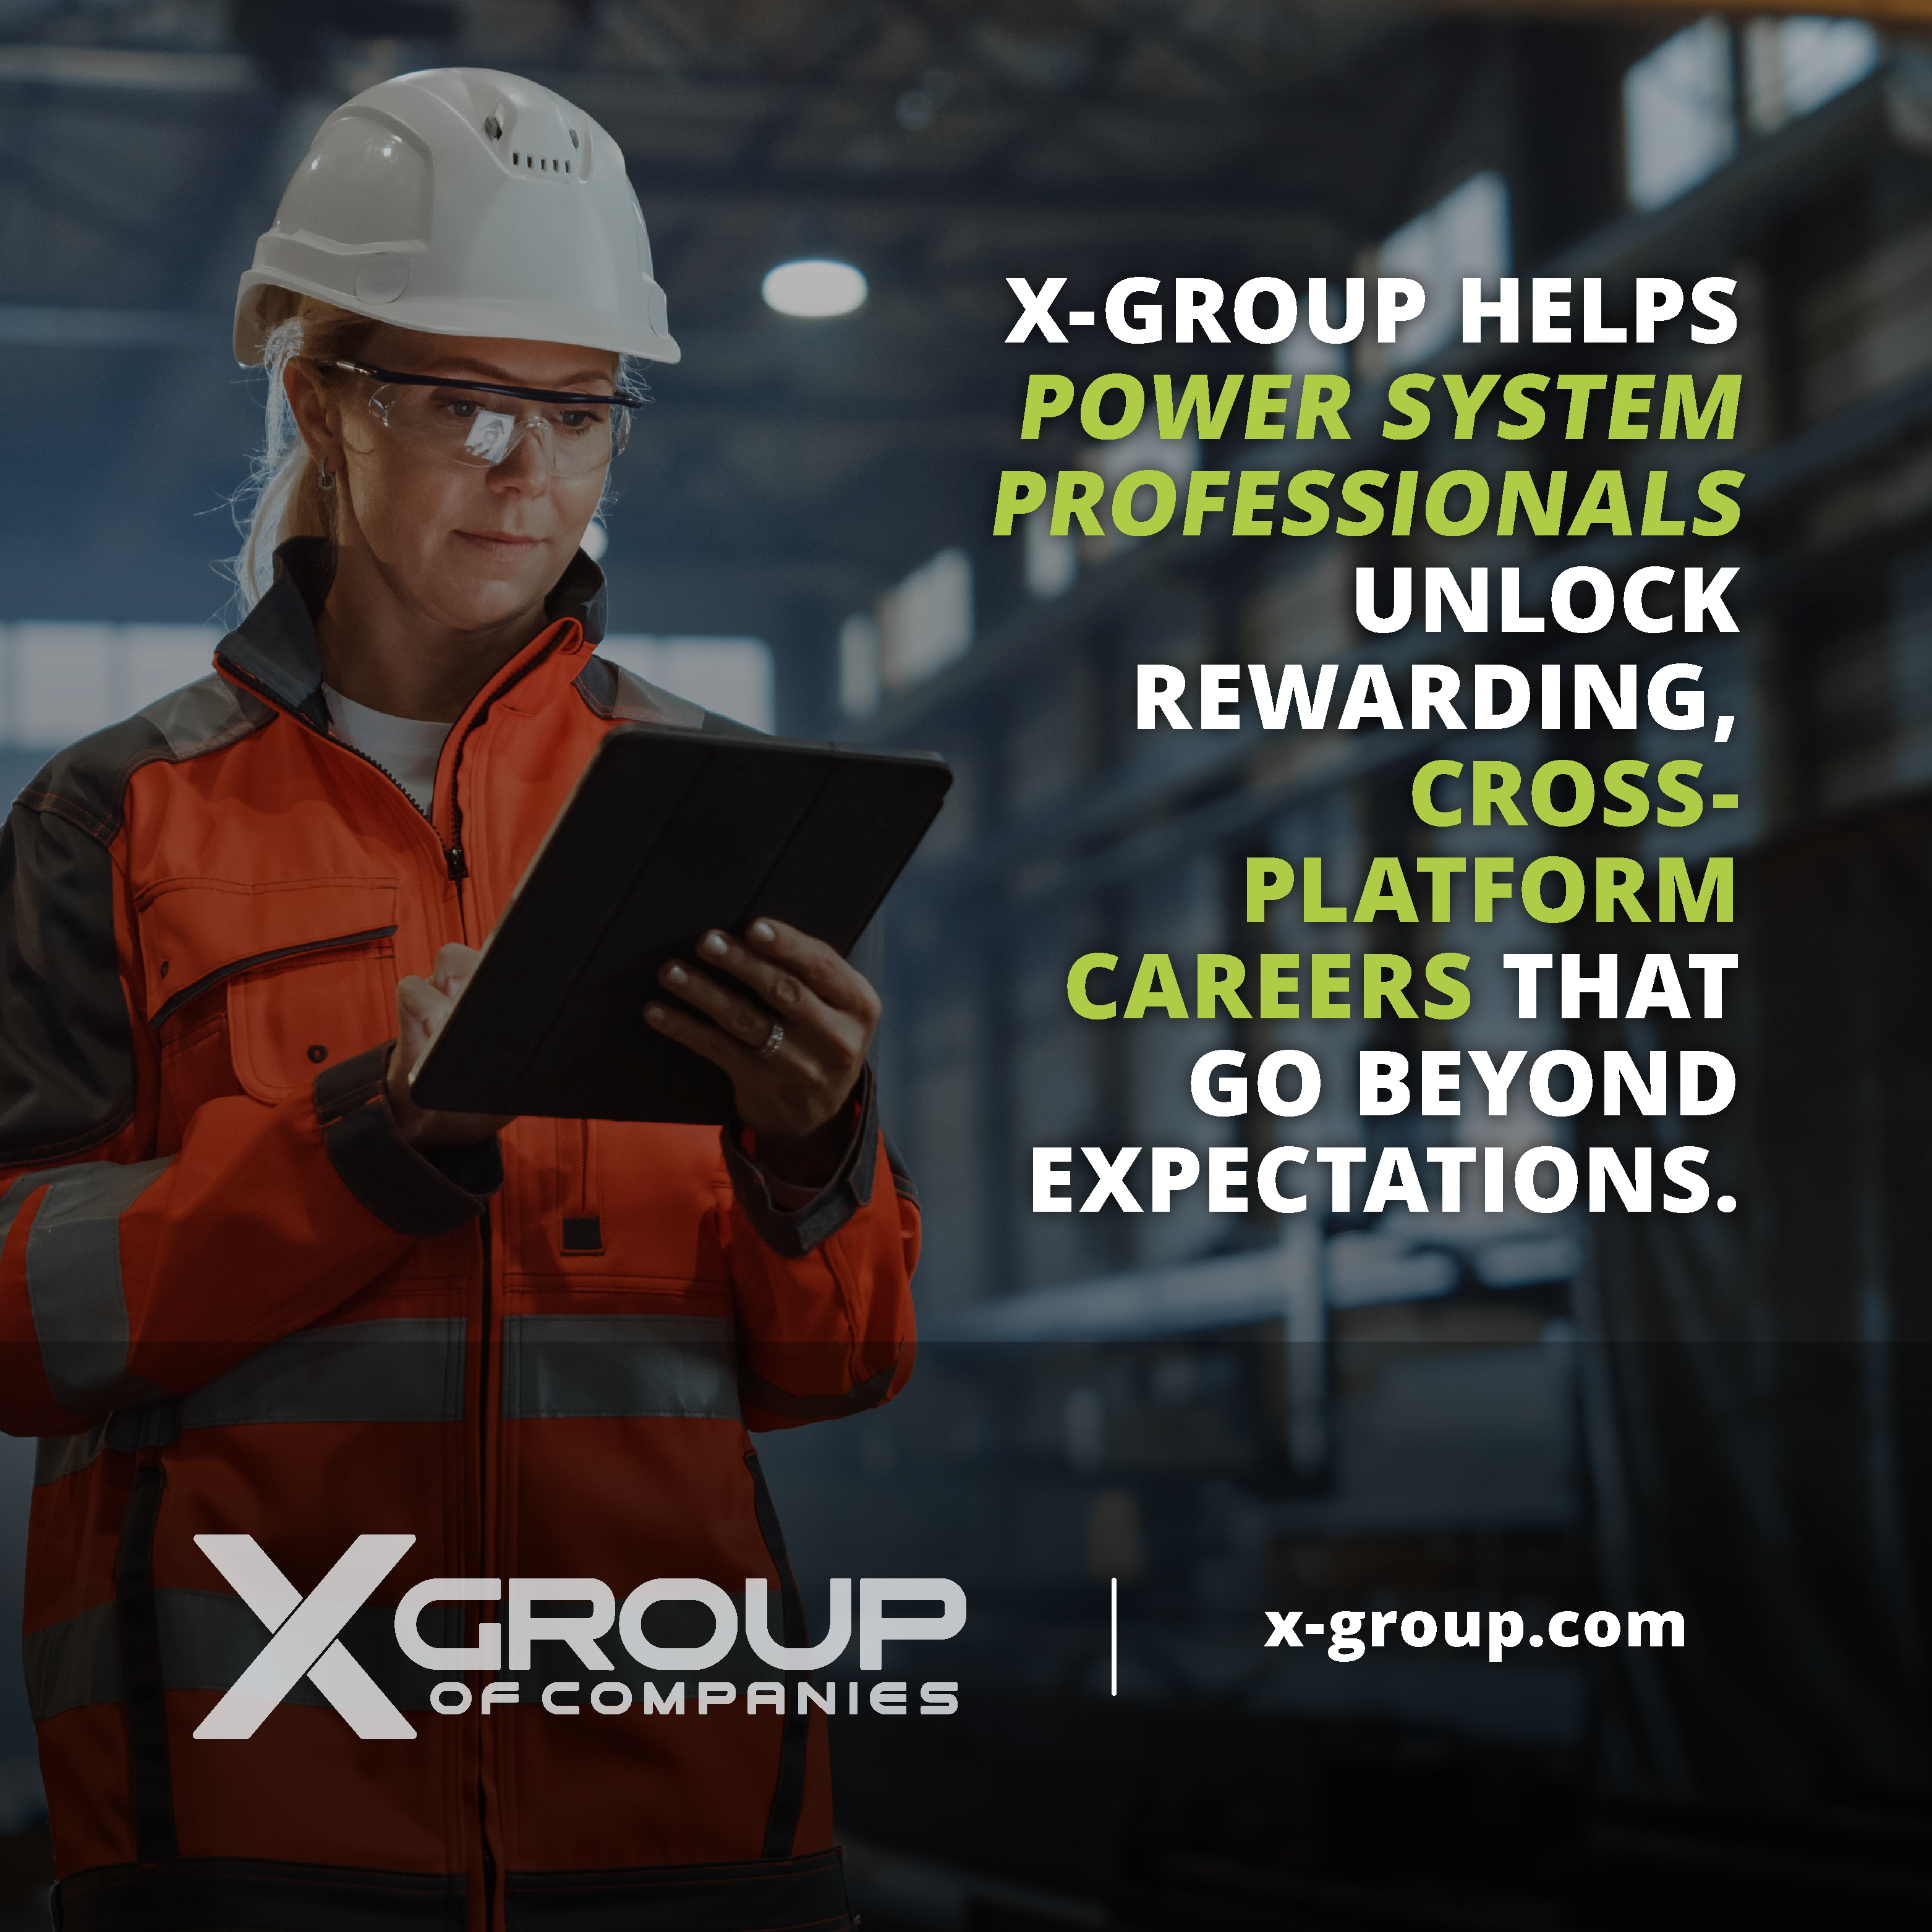 Career Pathways at X-Group